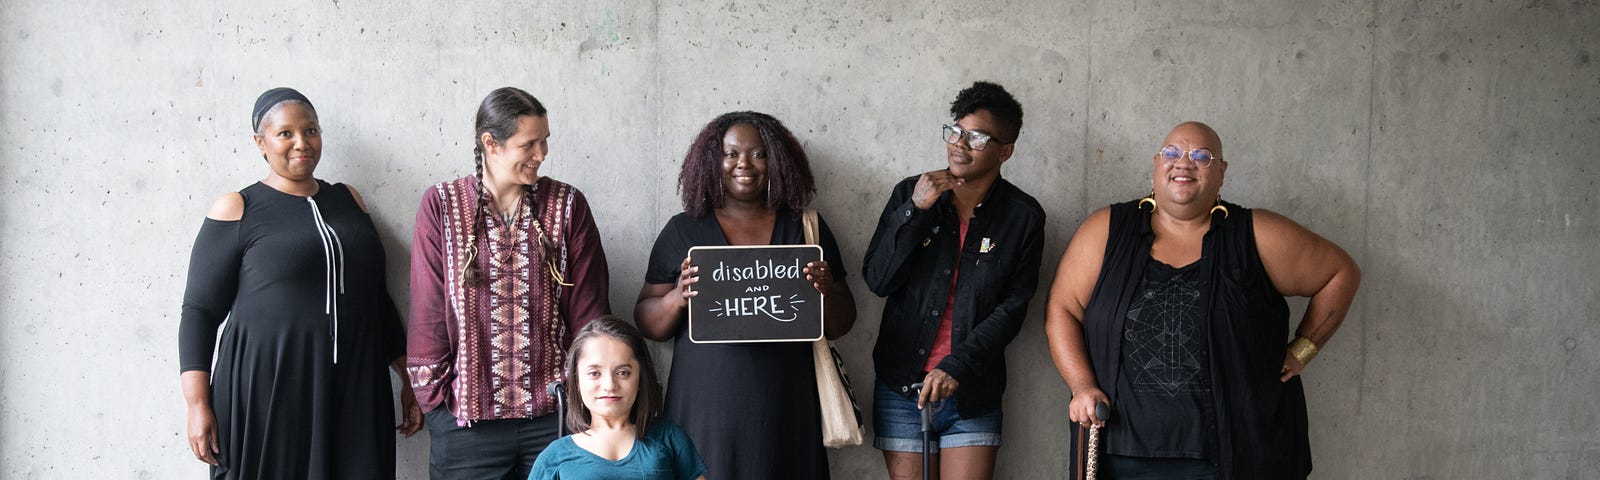 Six disabled people of colour smile and pose in front of a concrete wall.